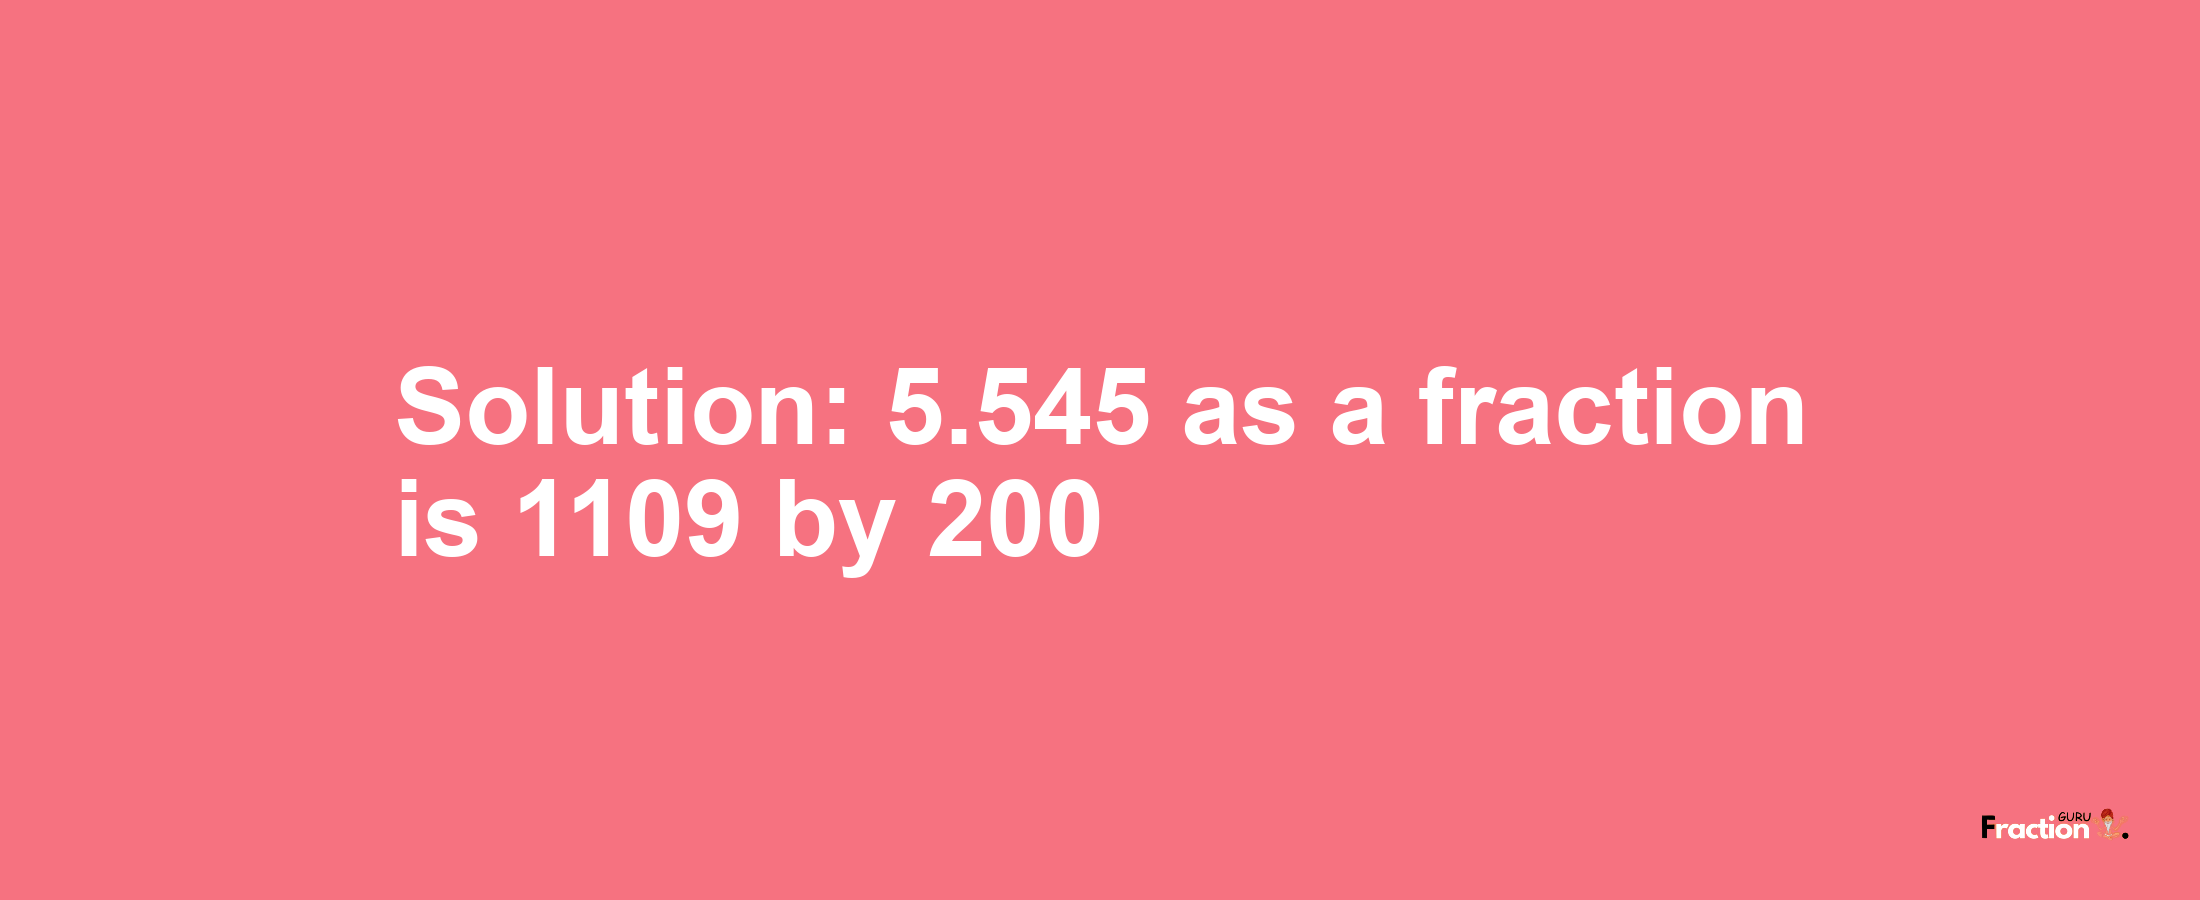 Solution:5.545 as a fraction is 1109/200